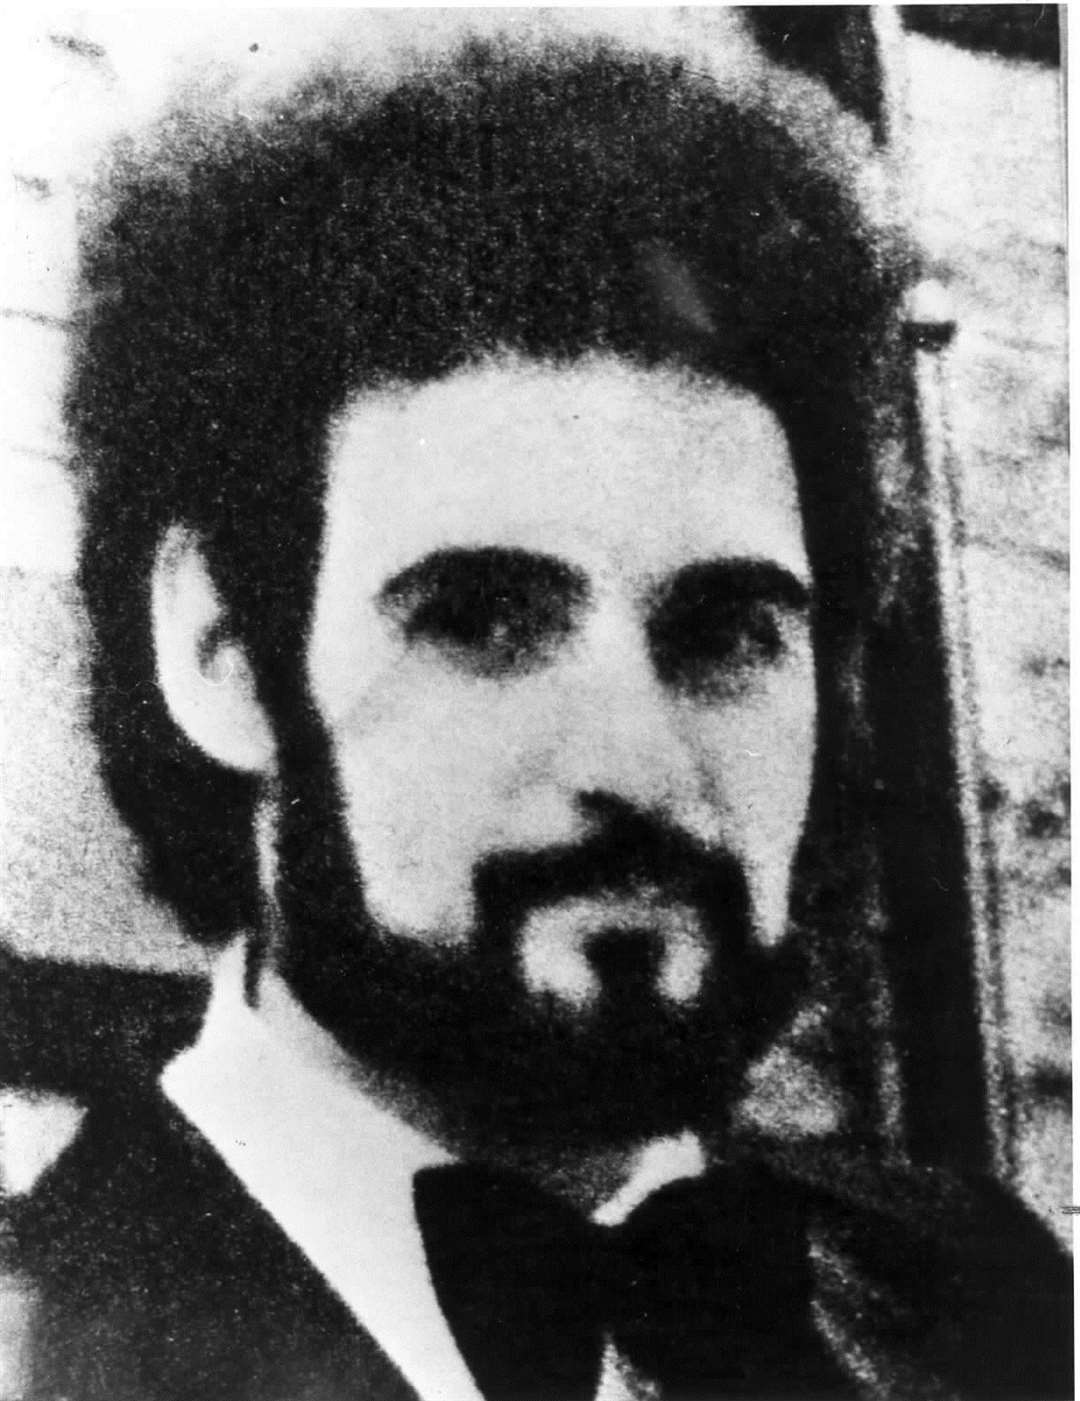 Peter Sutcliffe - Yorkshire Ripper file pic dated 22nd April, 1981 Negative Reference: 12a.719.17.81 (46833635)